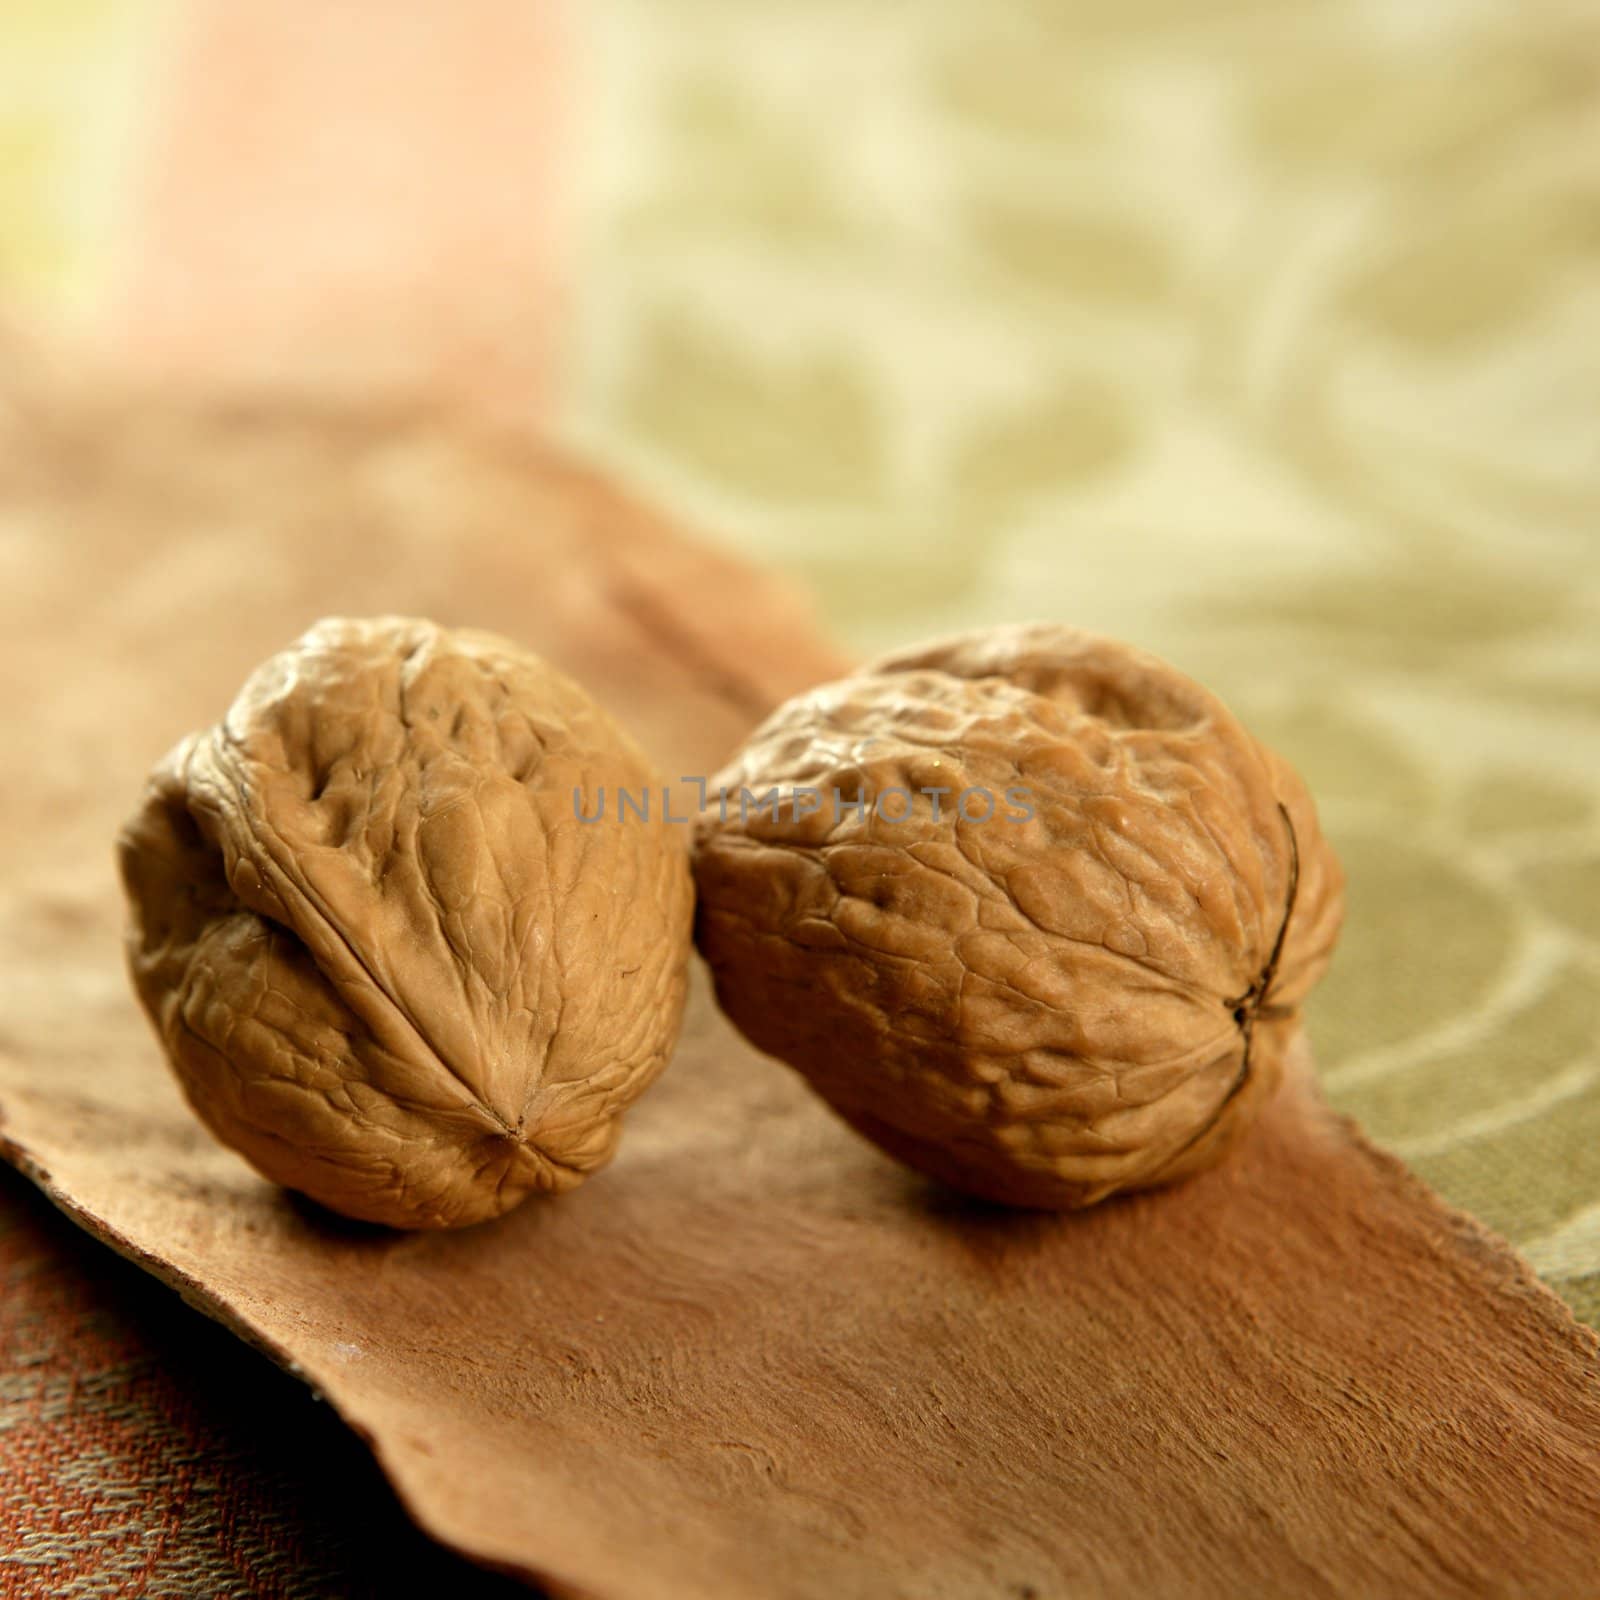 two walnut over tablecloth and wood